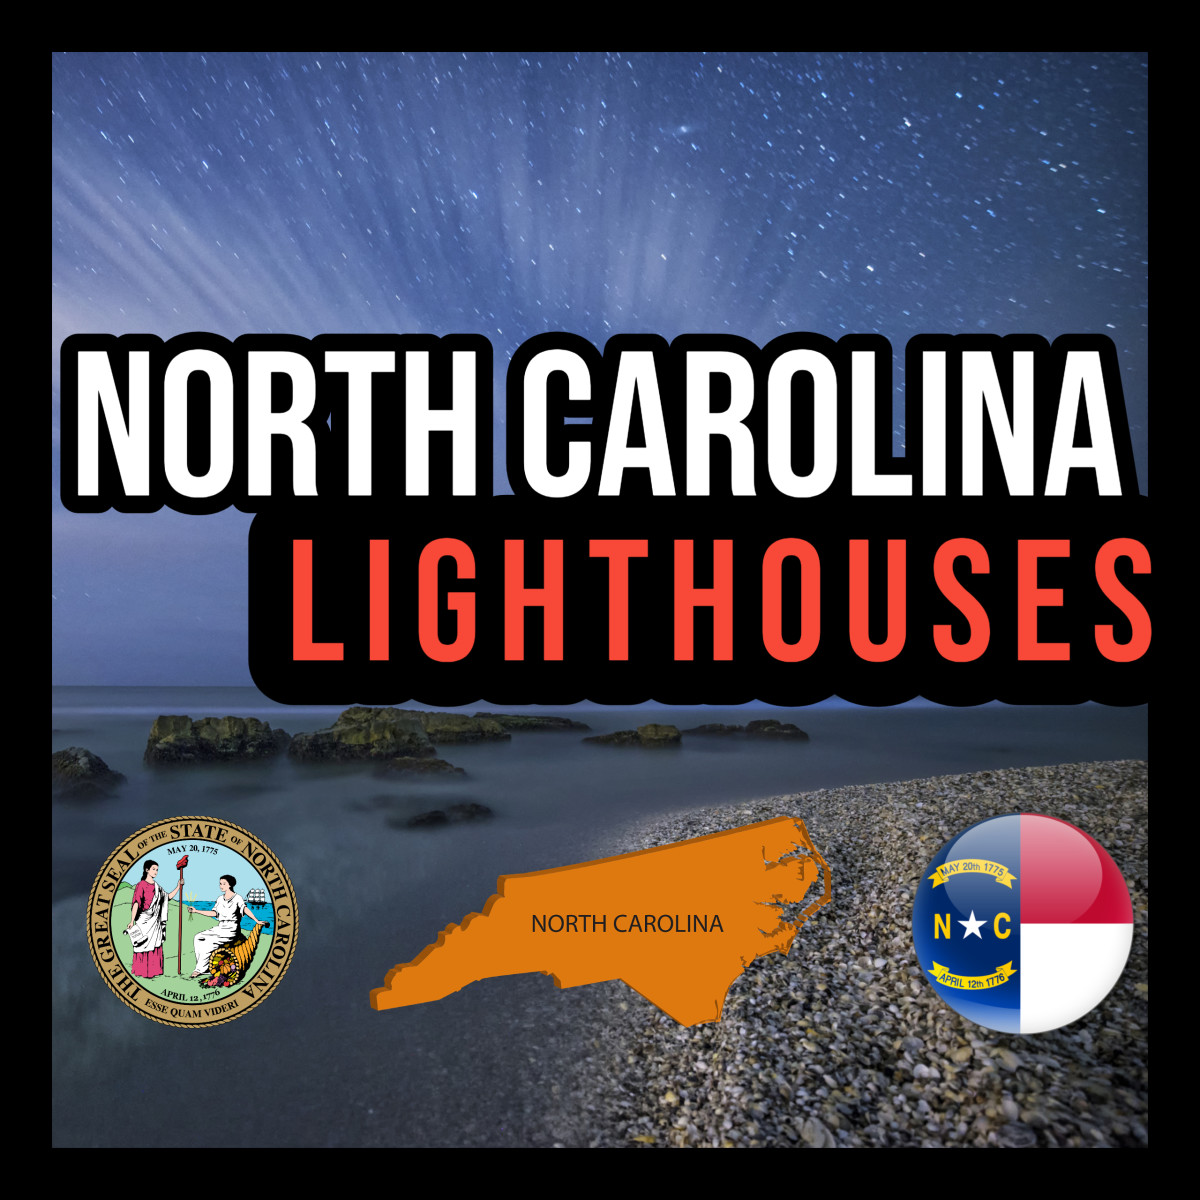 North Carolina Lighthouses (History and Facts)